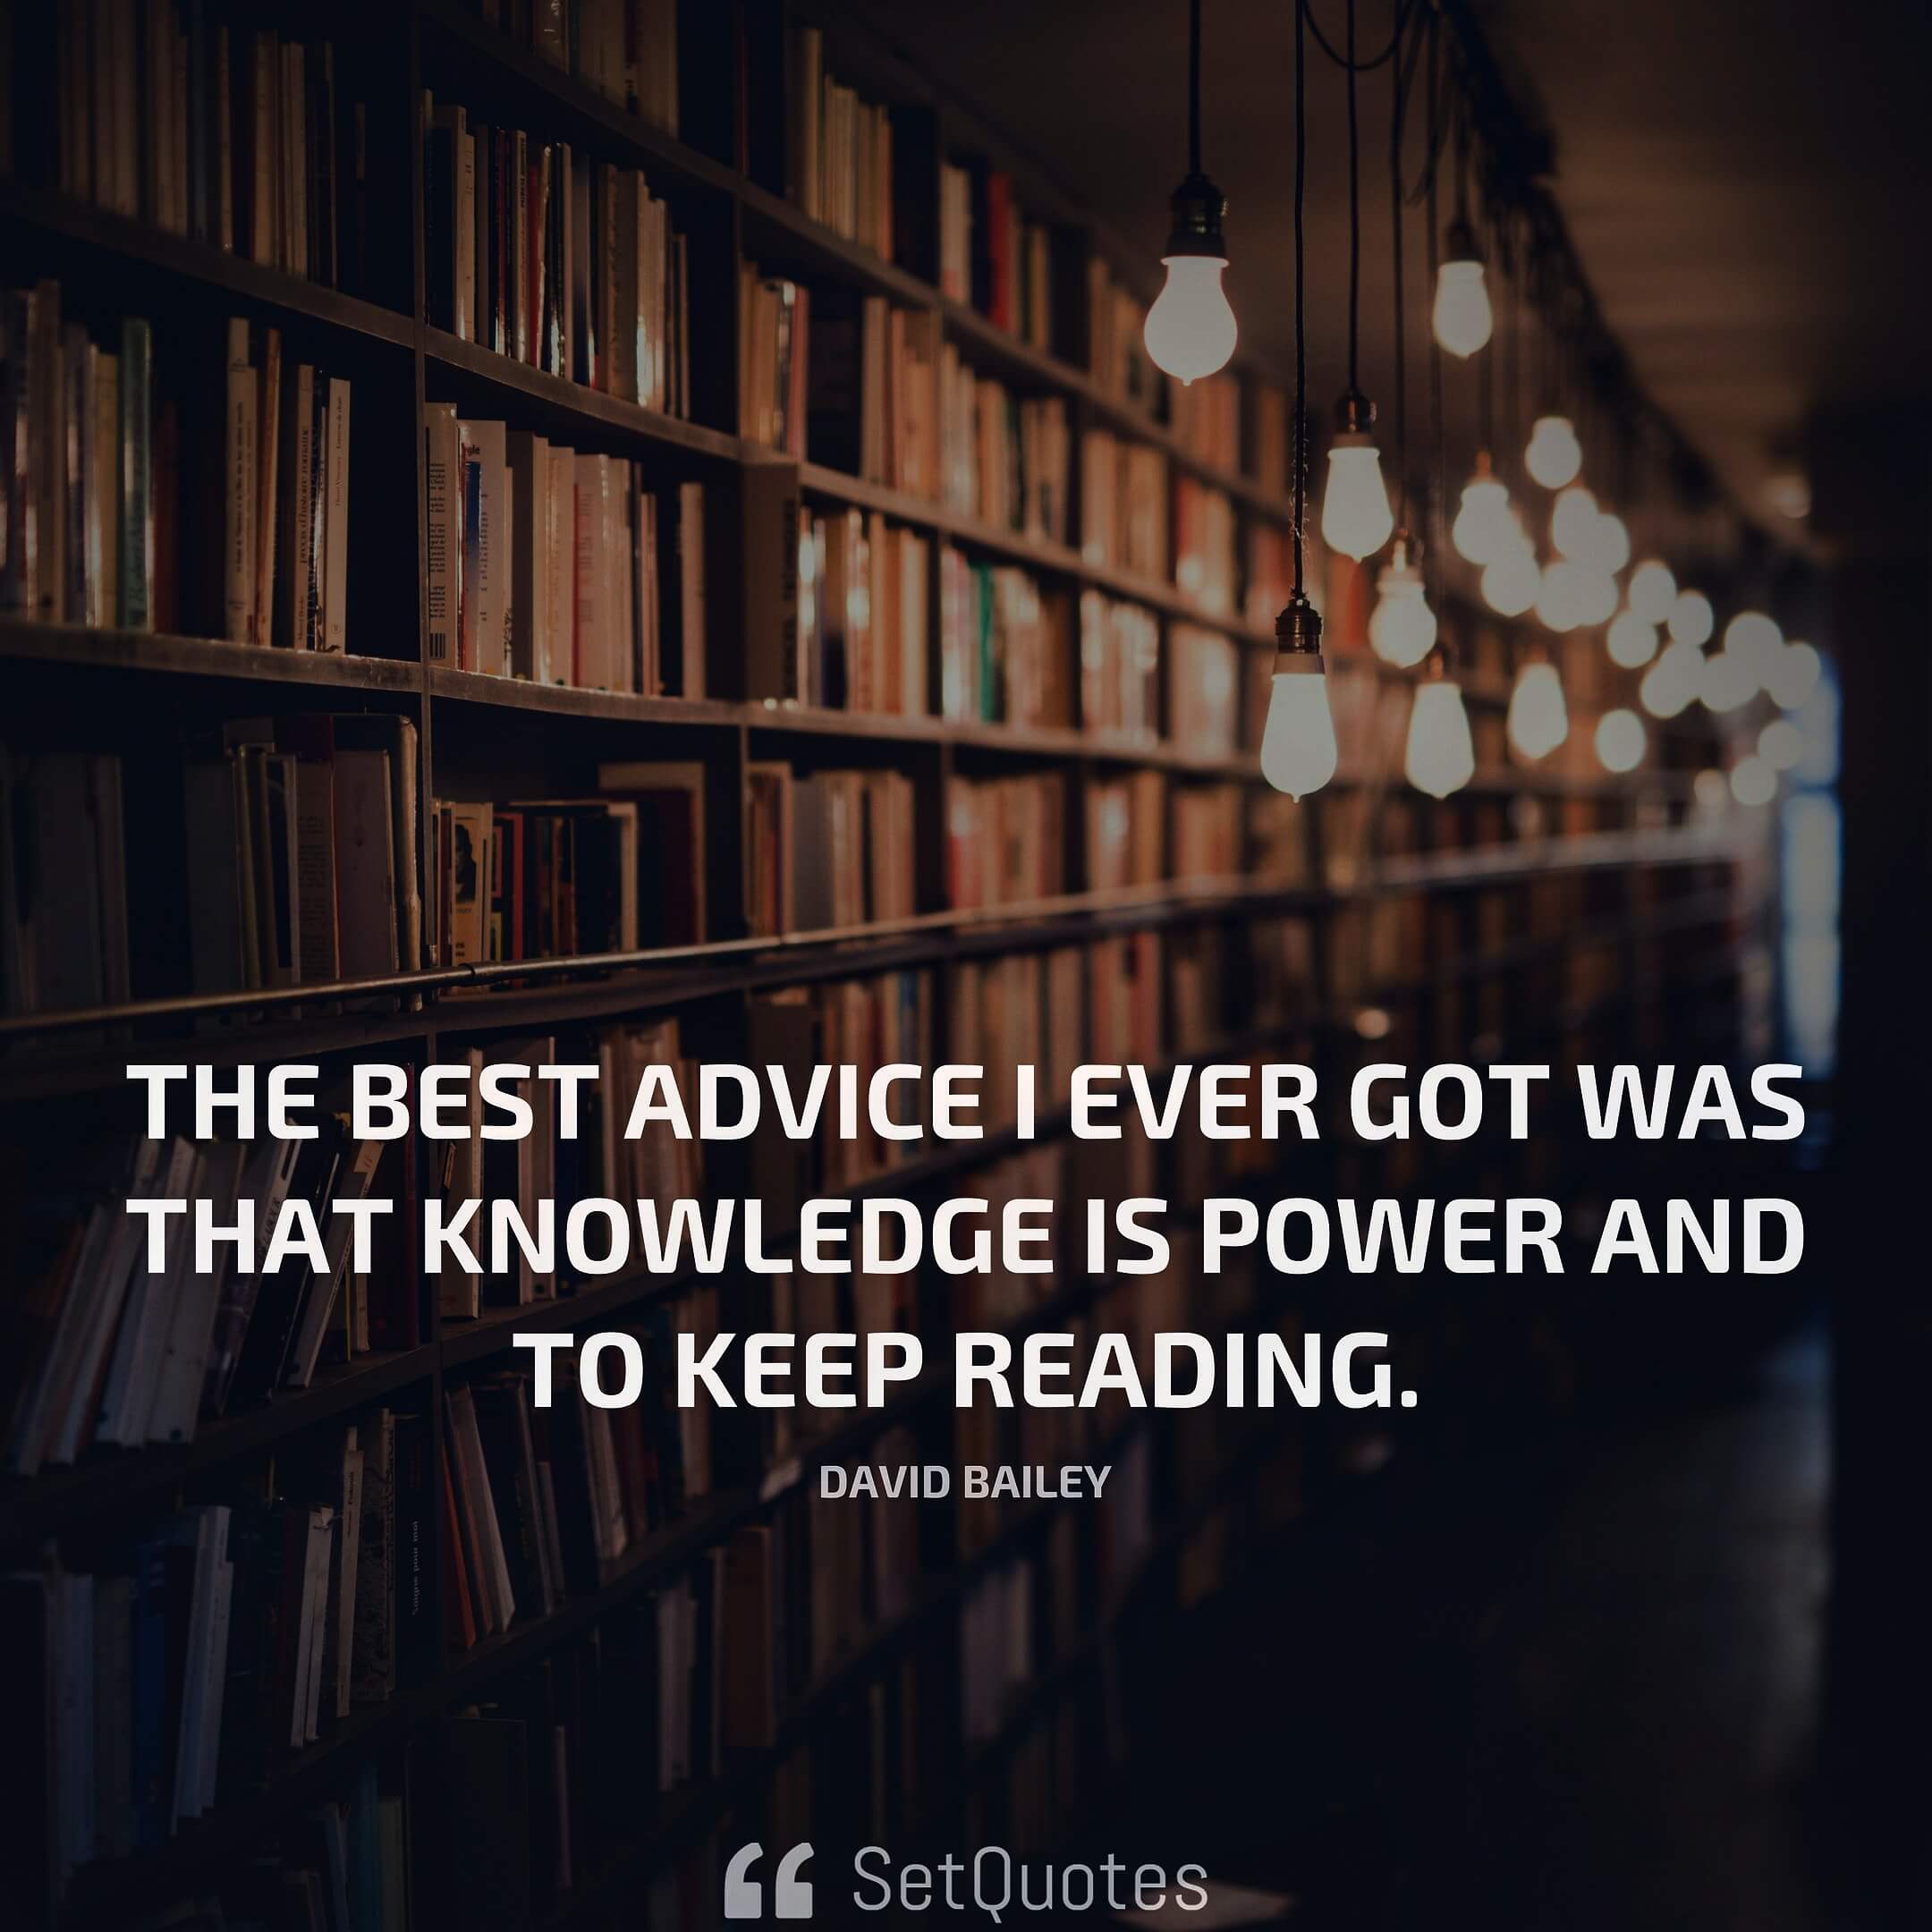 The best advice I ever got was that knowledge is power and to keep reading. - David Bailey